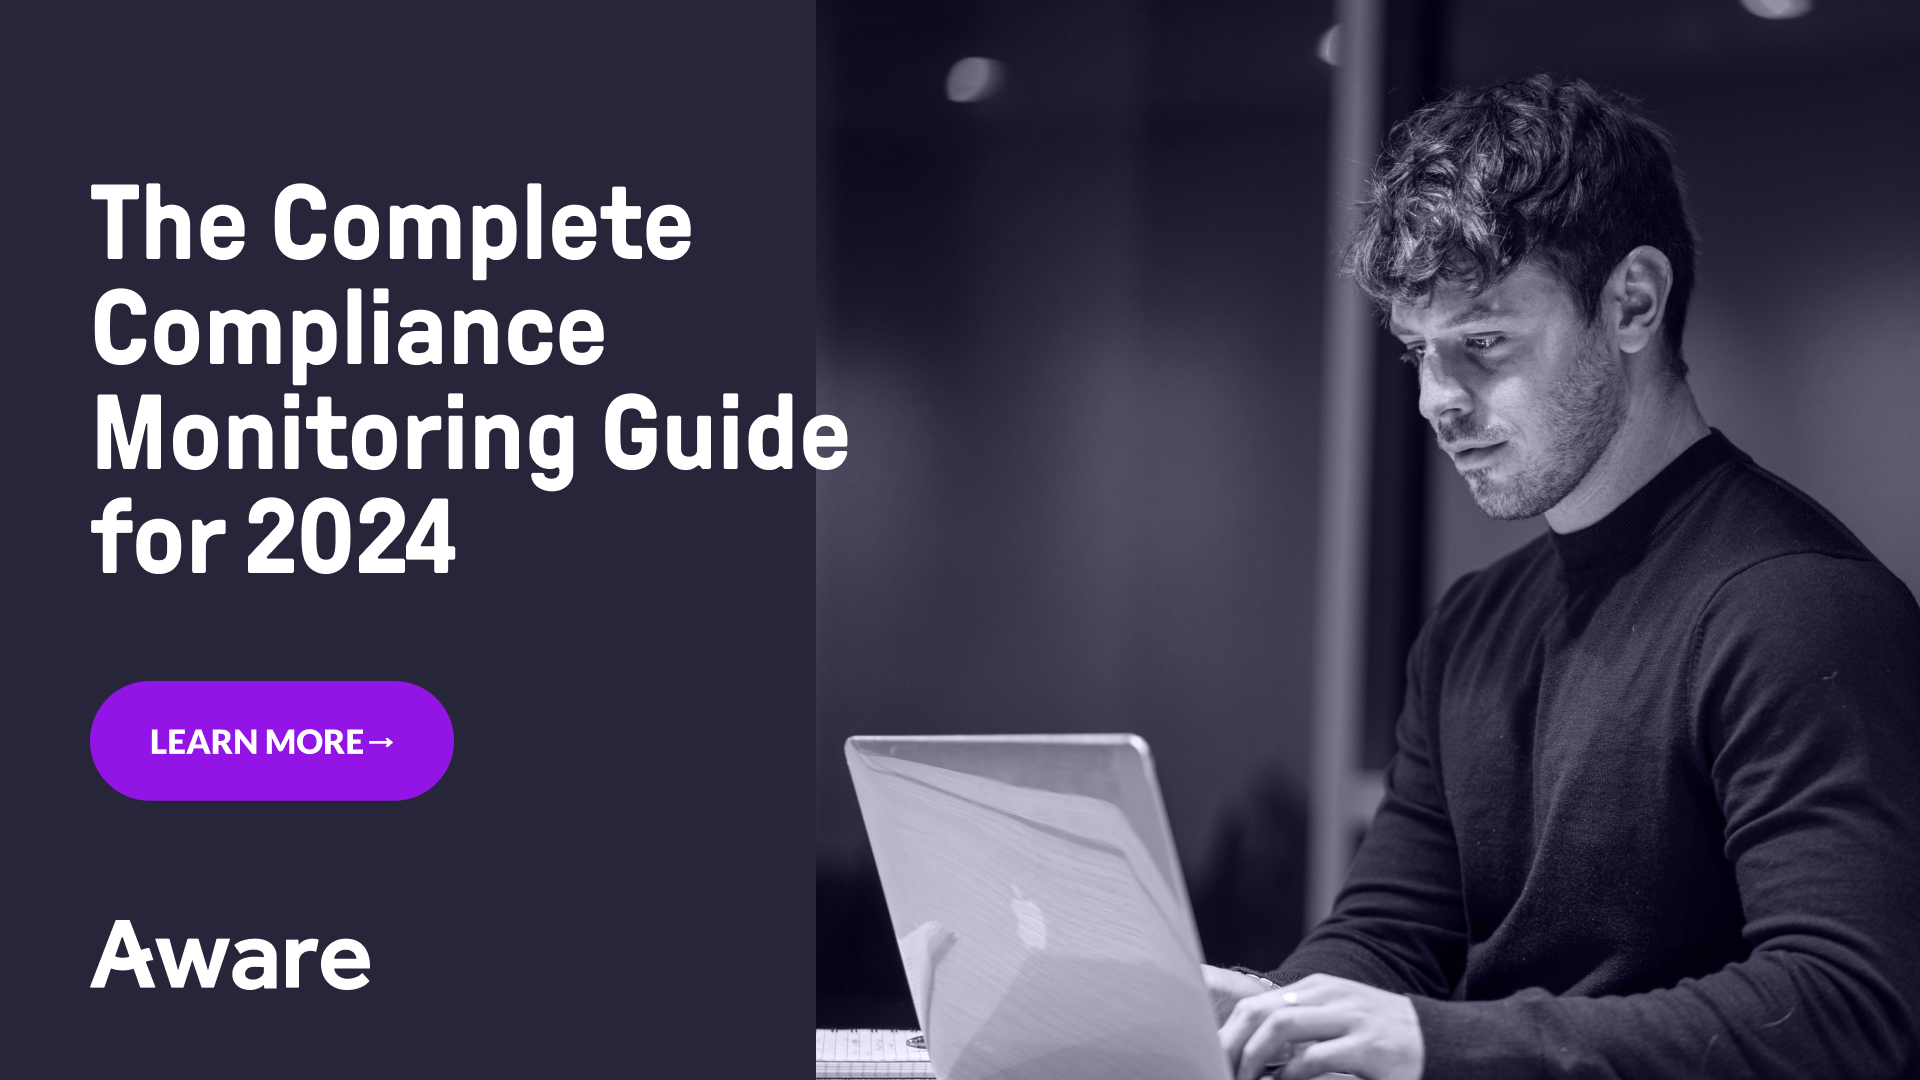 The Complete Compliance Monitoring Guide for 2024